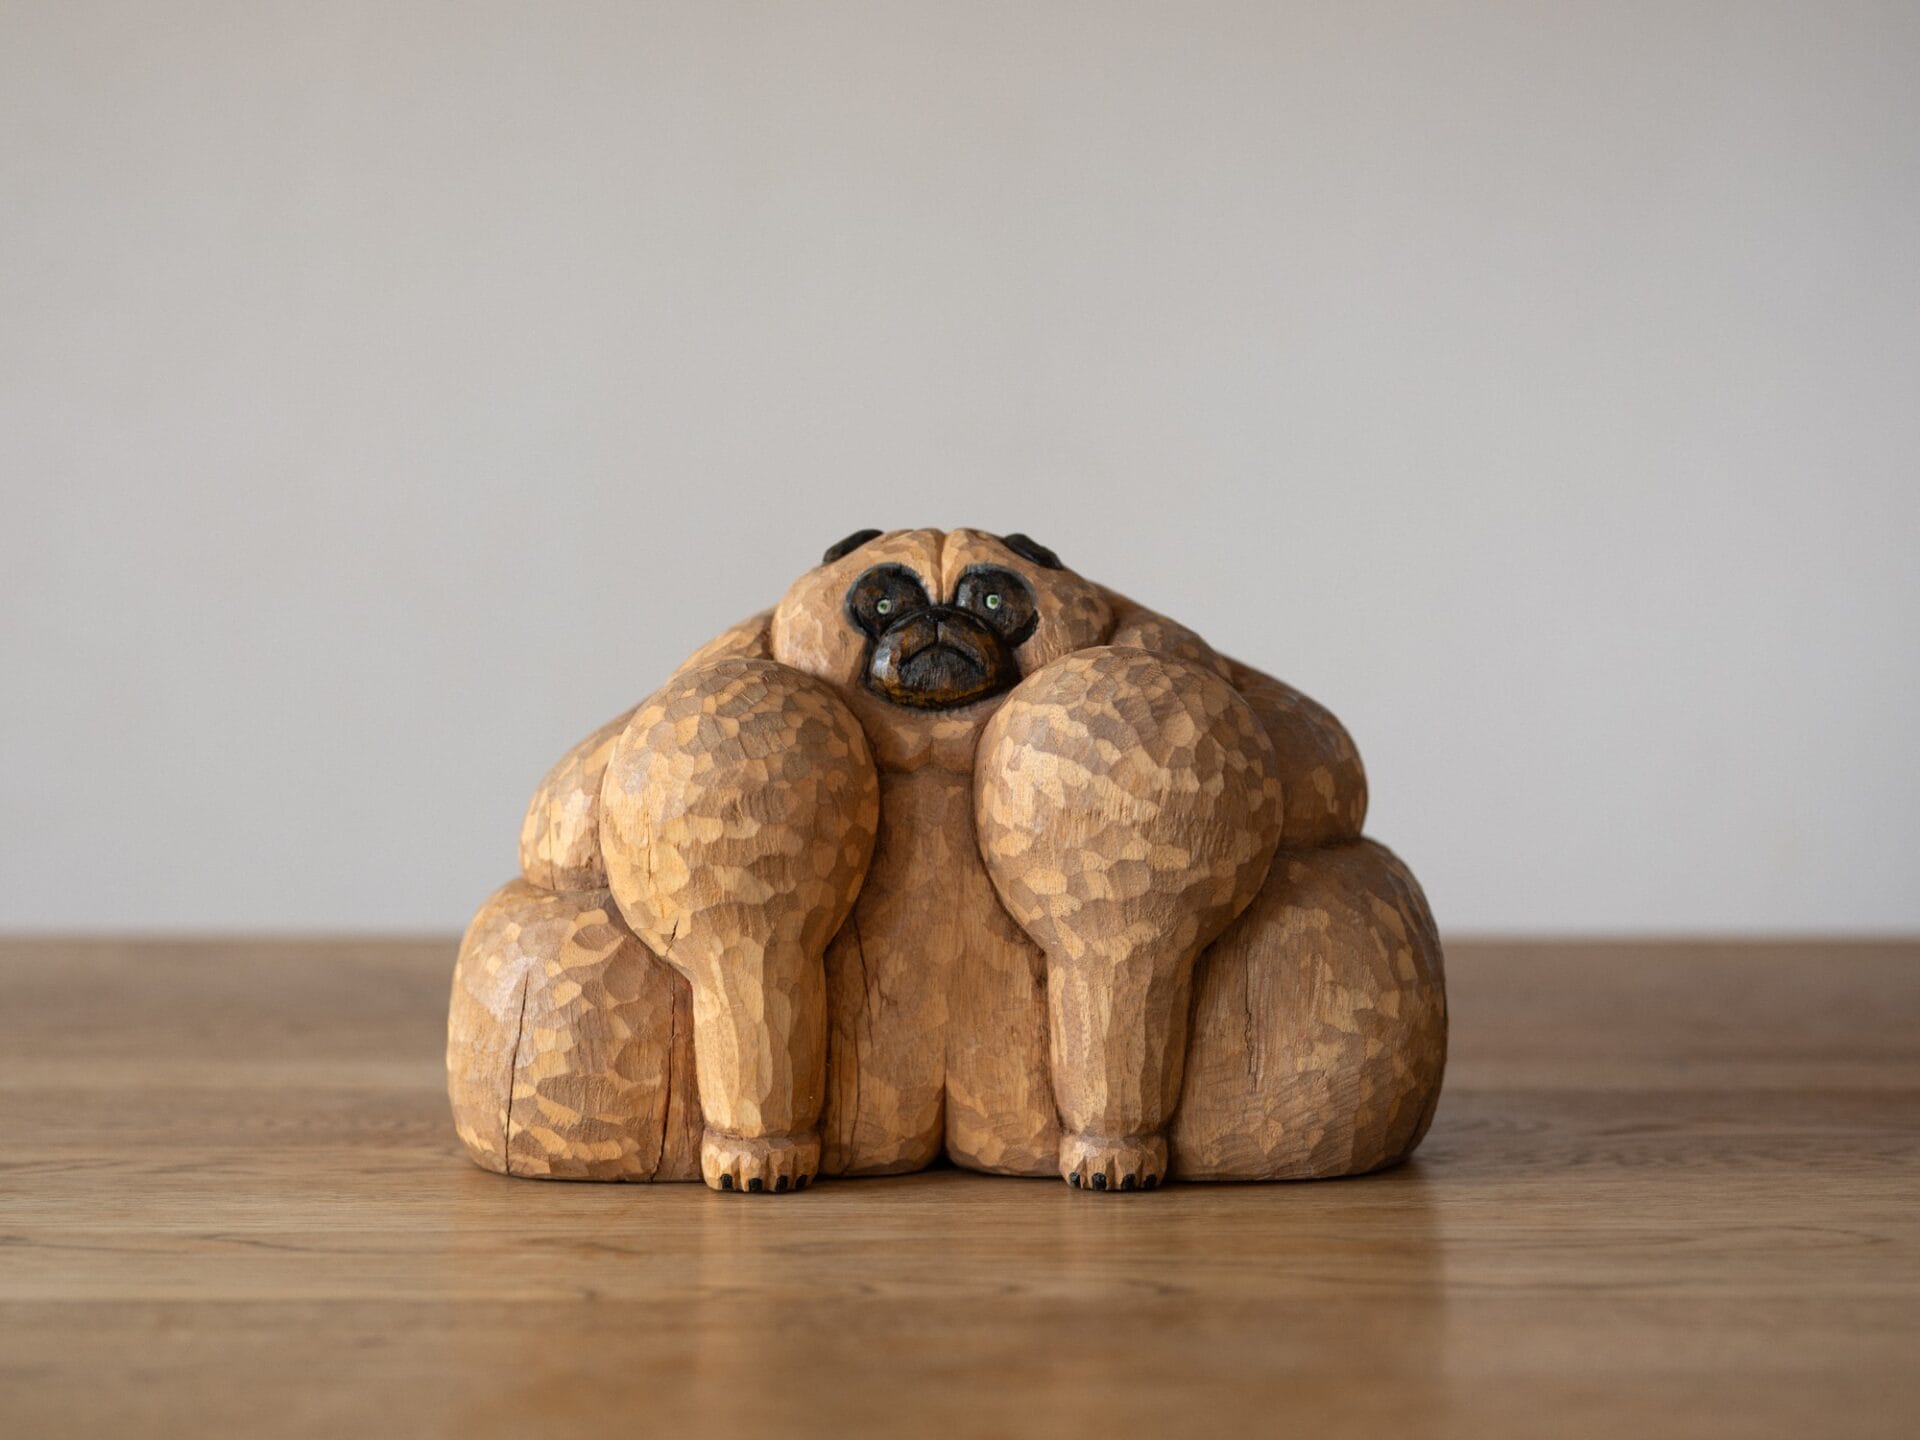 a whimsical wooden sculpture of a pug with large, bulky muscles